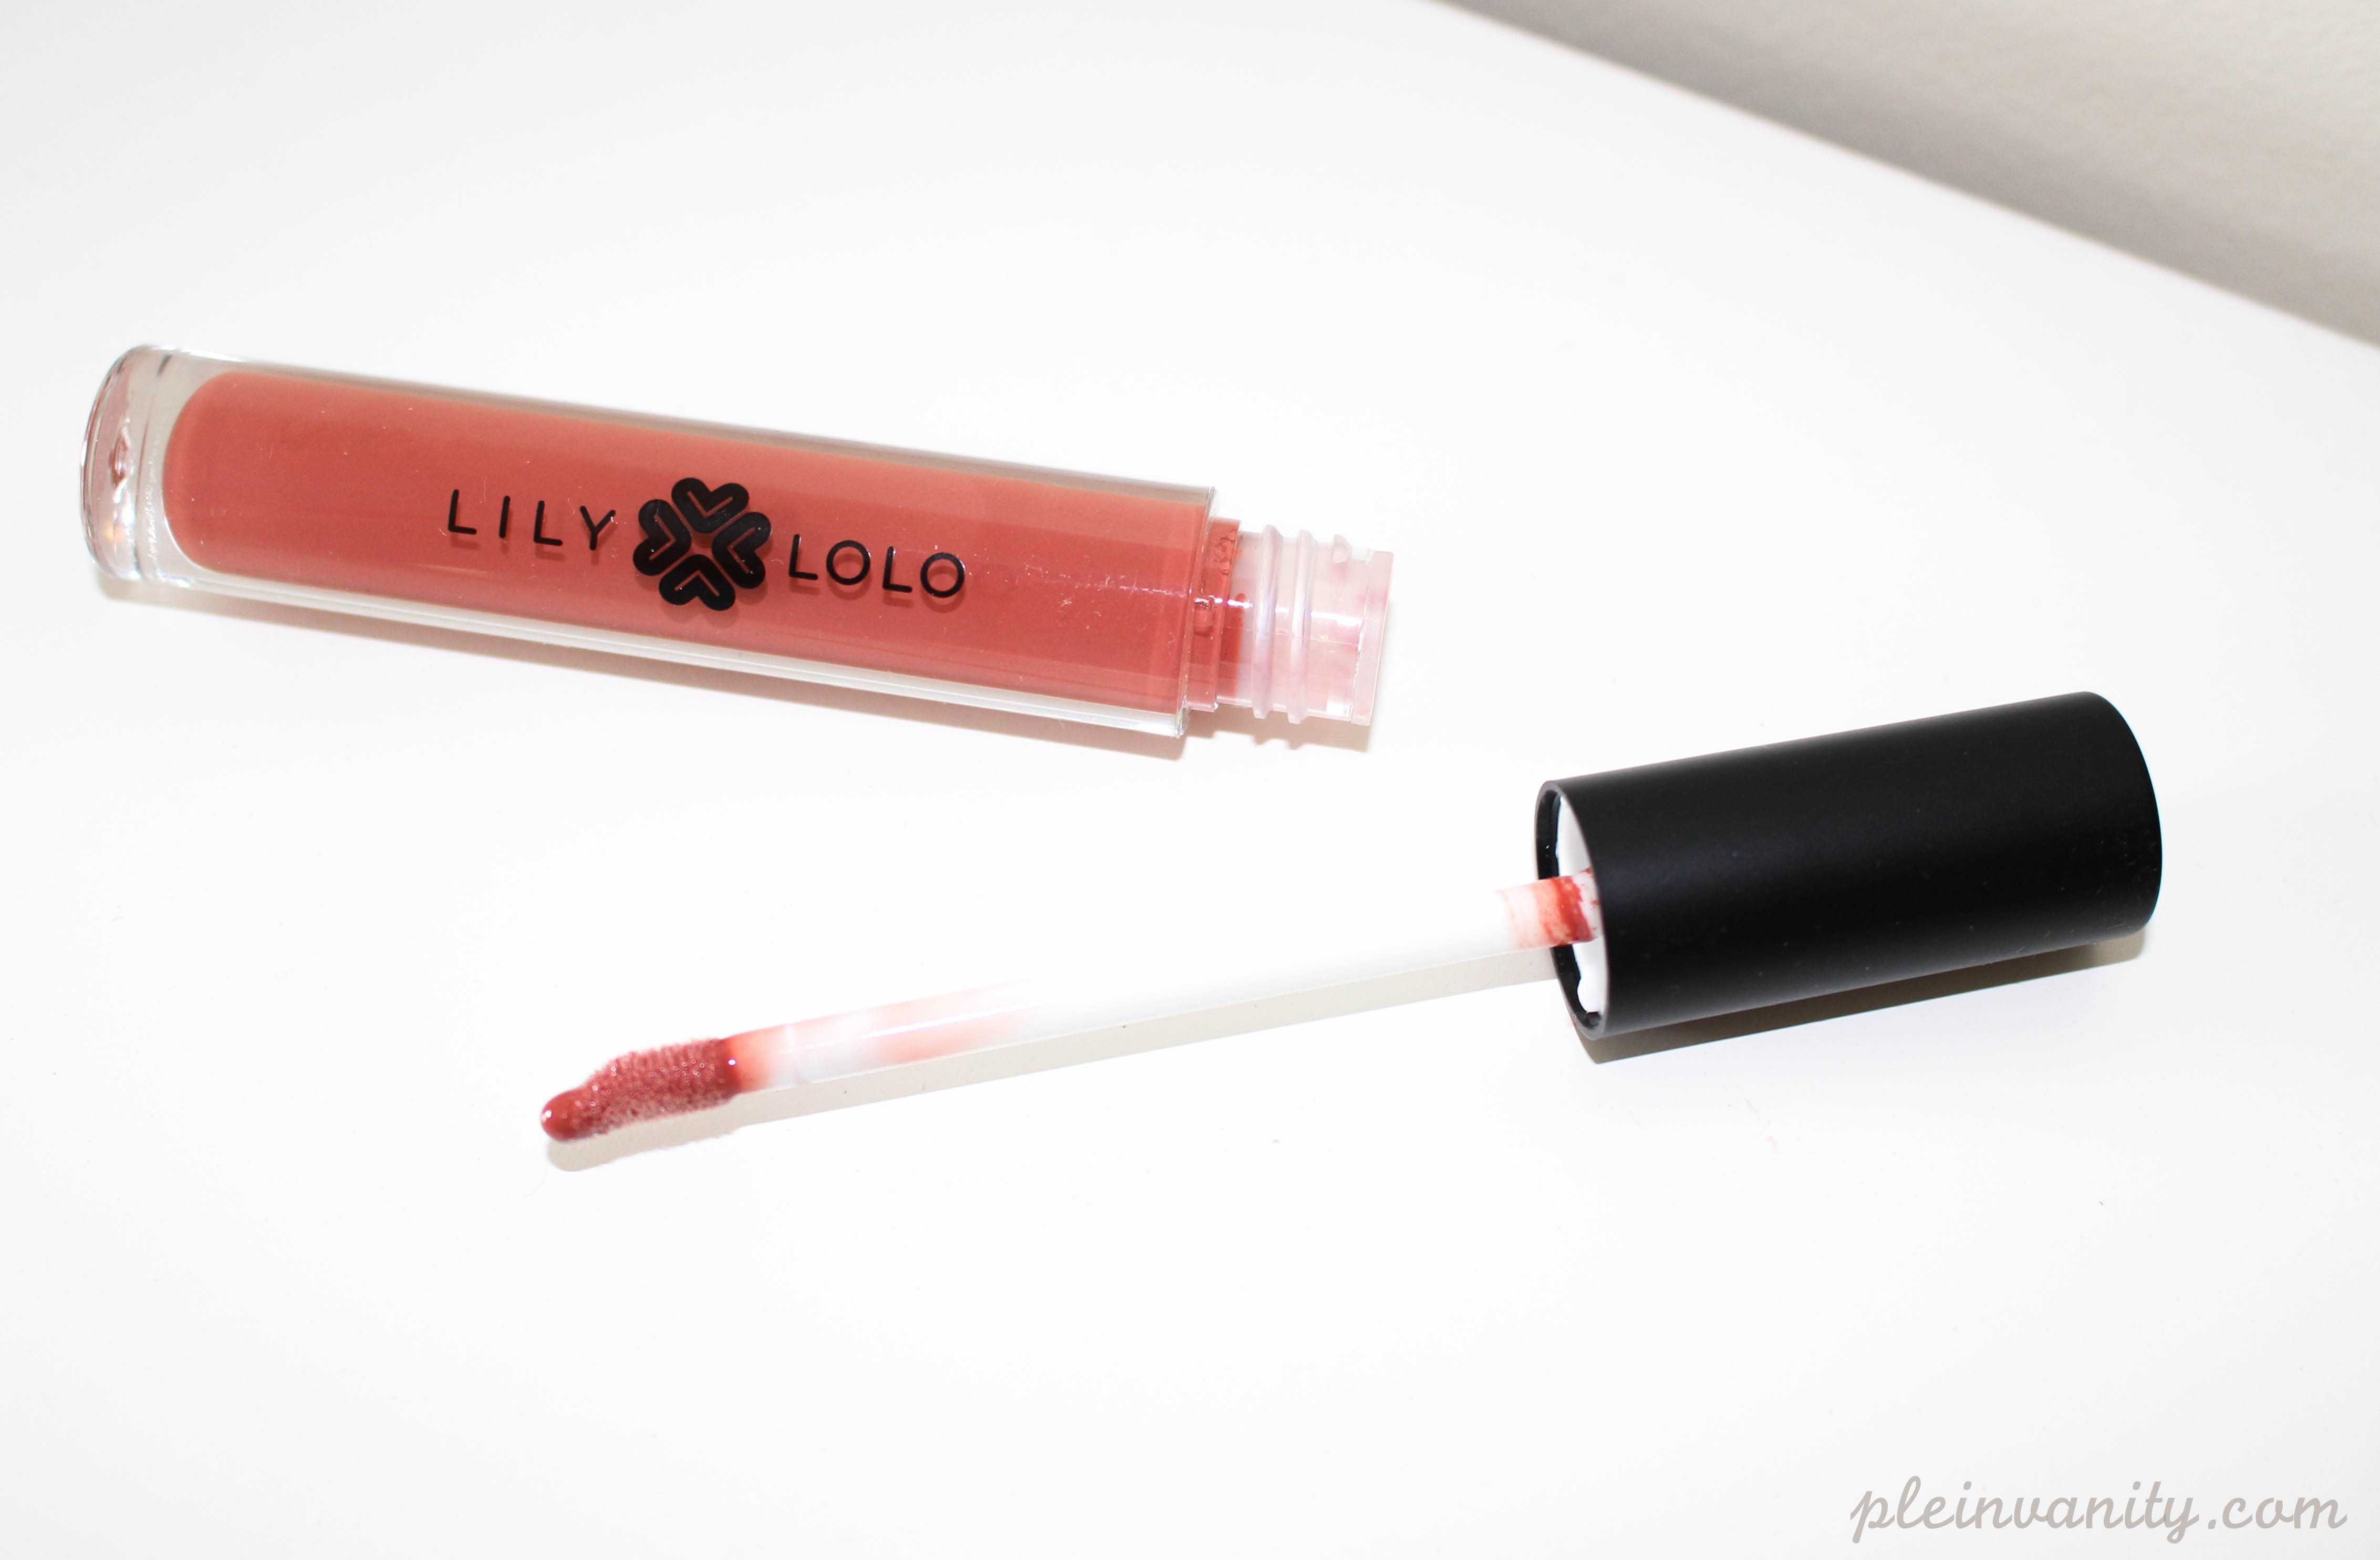 Lily Lolo High Flyer lipgloss